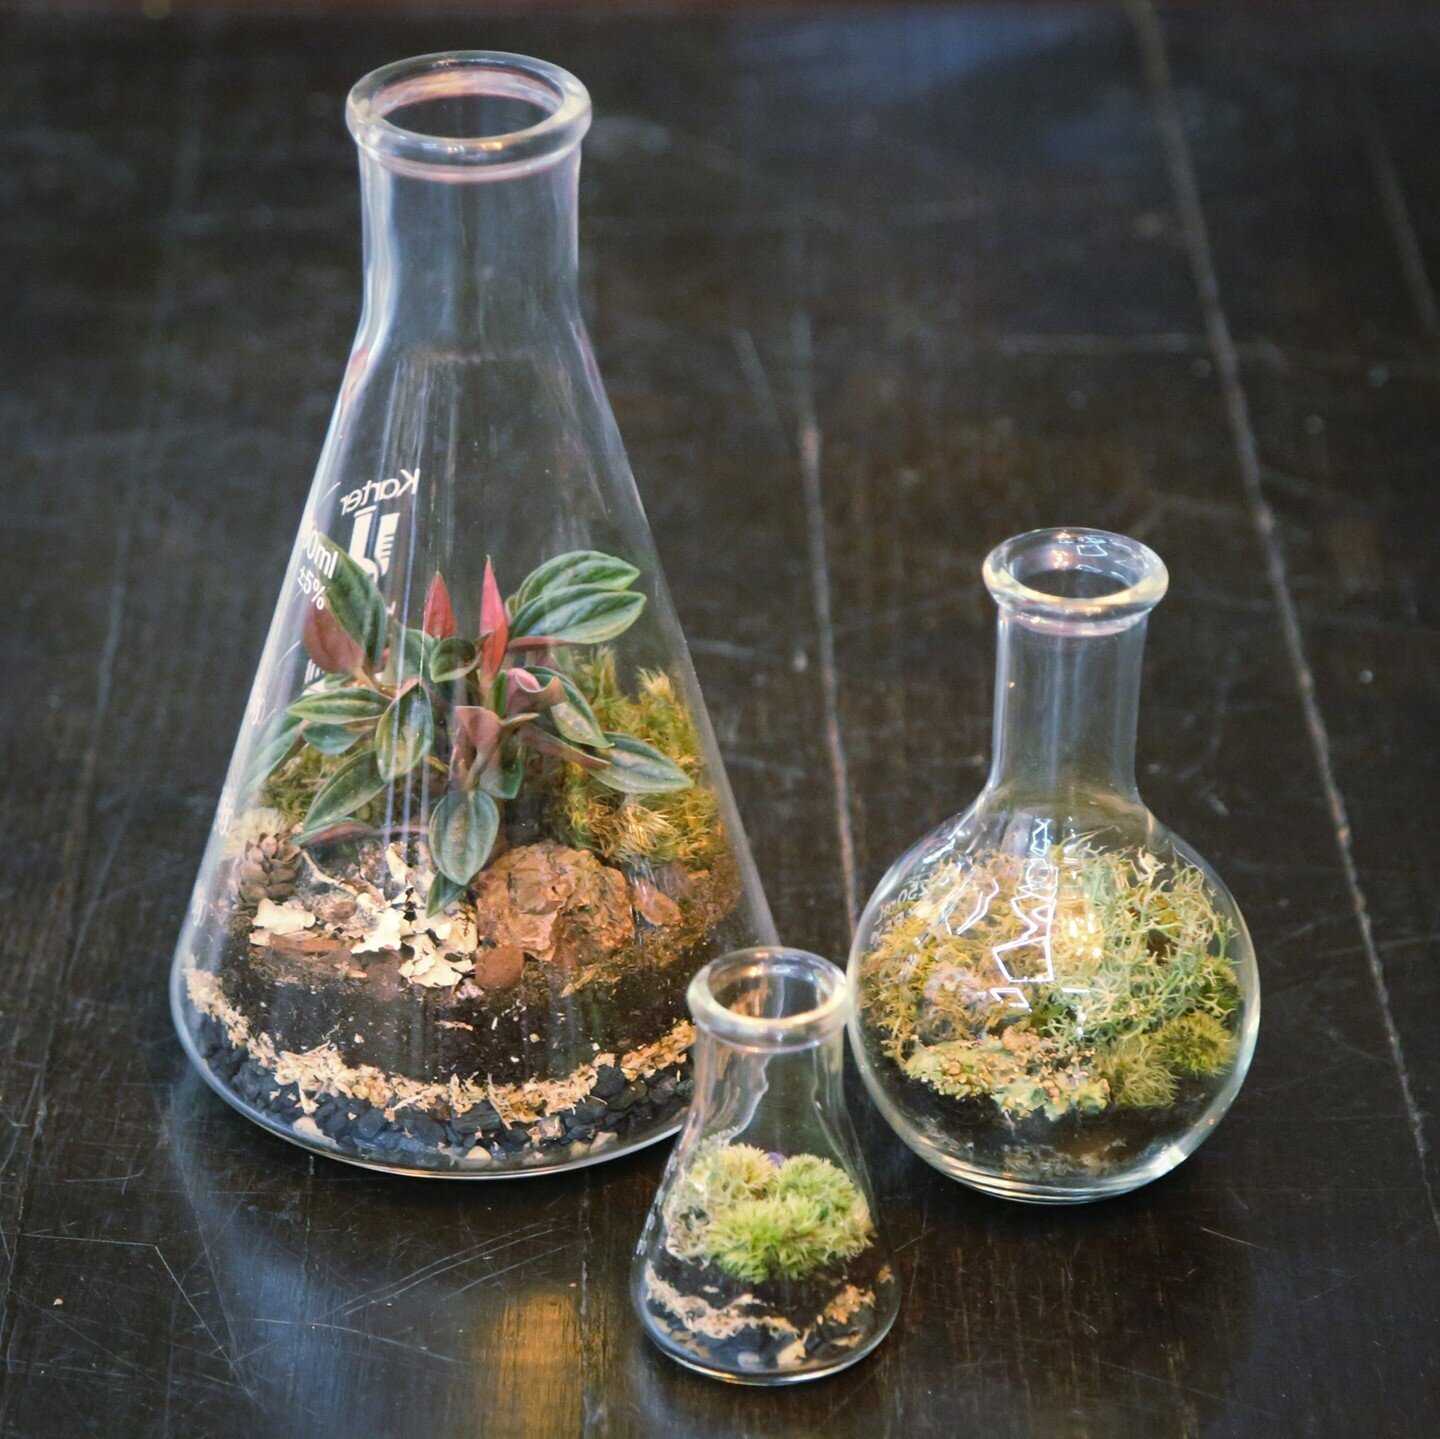 We were able to get our hands on some laboratory glassware, which means beaker terrariums are back! These precious babies are planted with live moss and lichen. The largest one also contains a little Peperomia 'Eden Rosso'. Come by the shop to check 